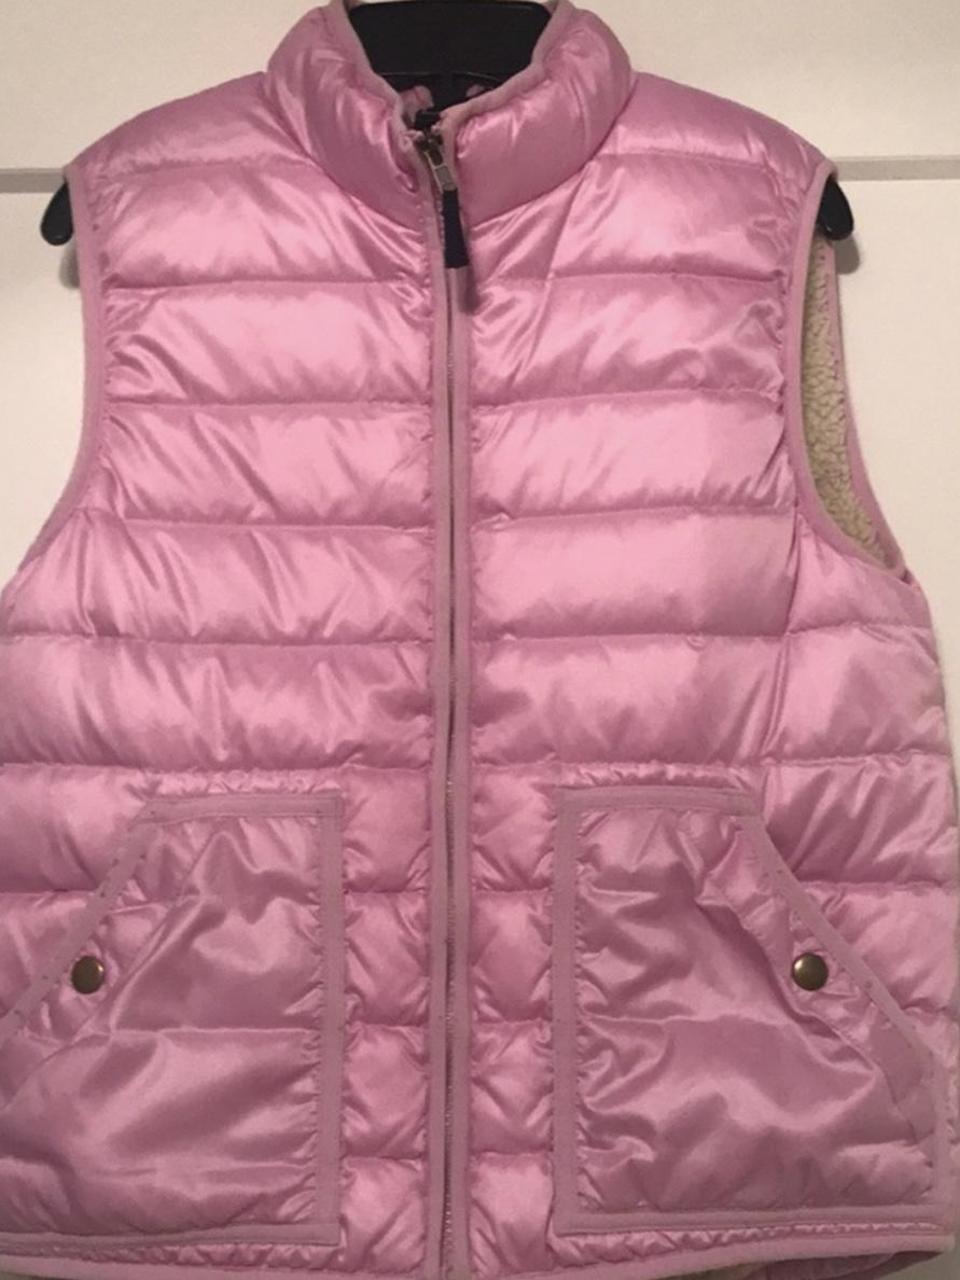 Crewcuts by J.Crew Pink Gilet